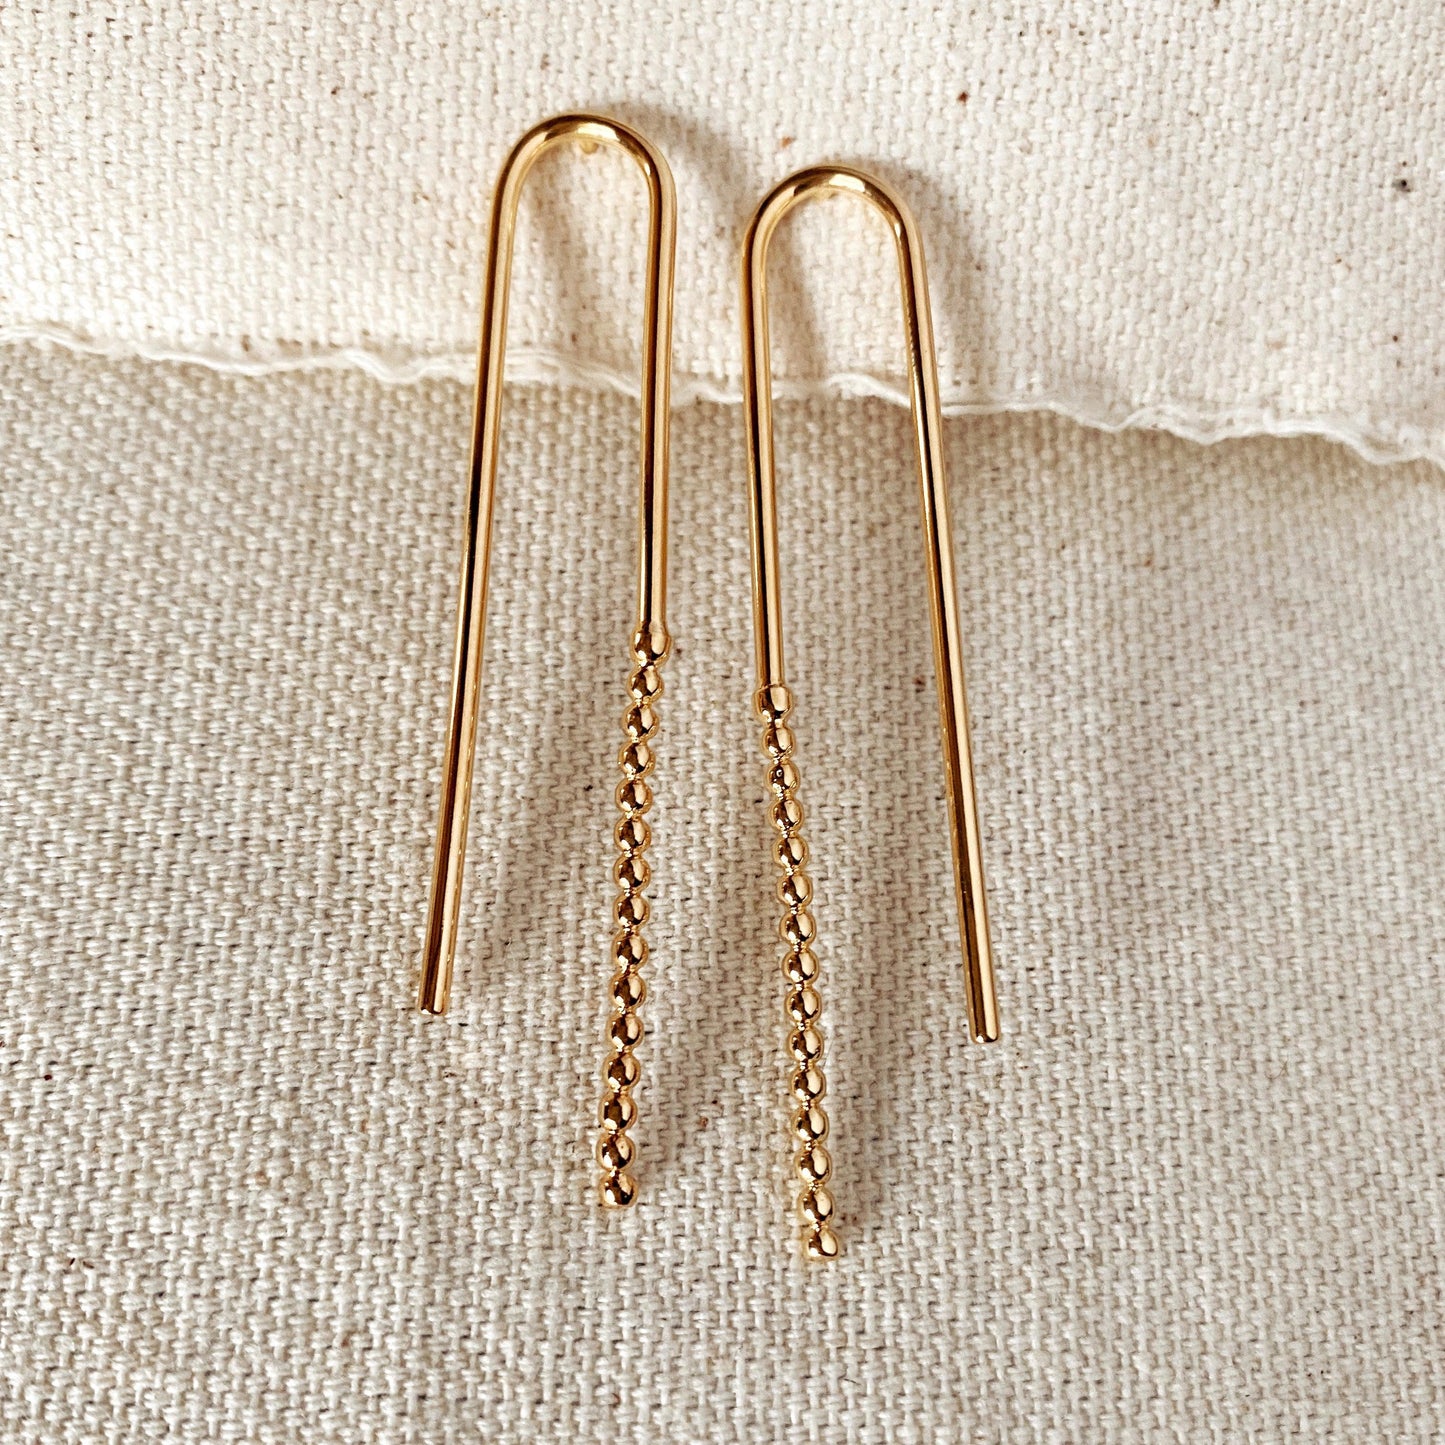 GoldFi 18k Gold Filled Shaped Drop Earrings Featuring Beaded End